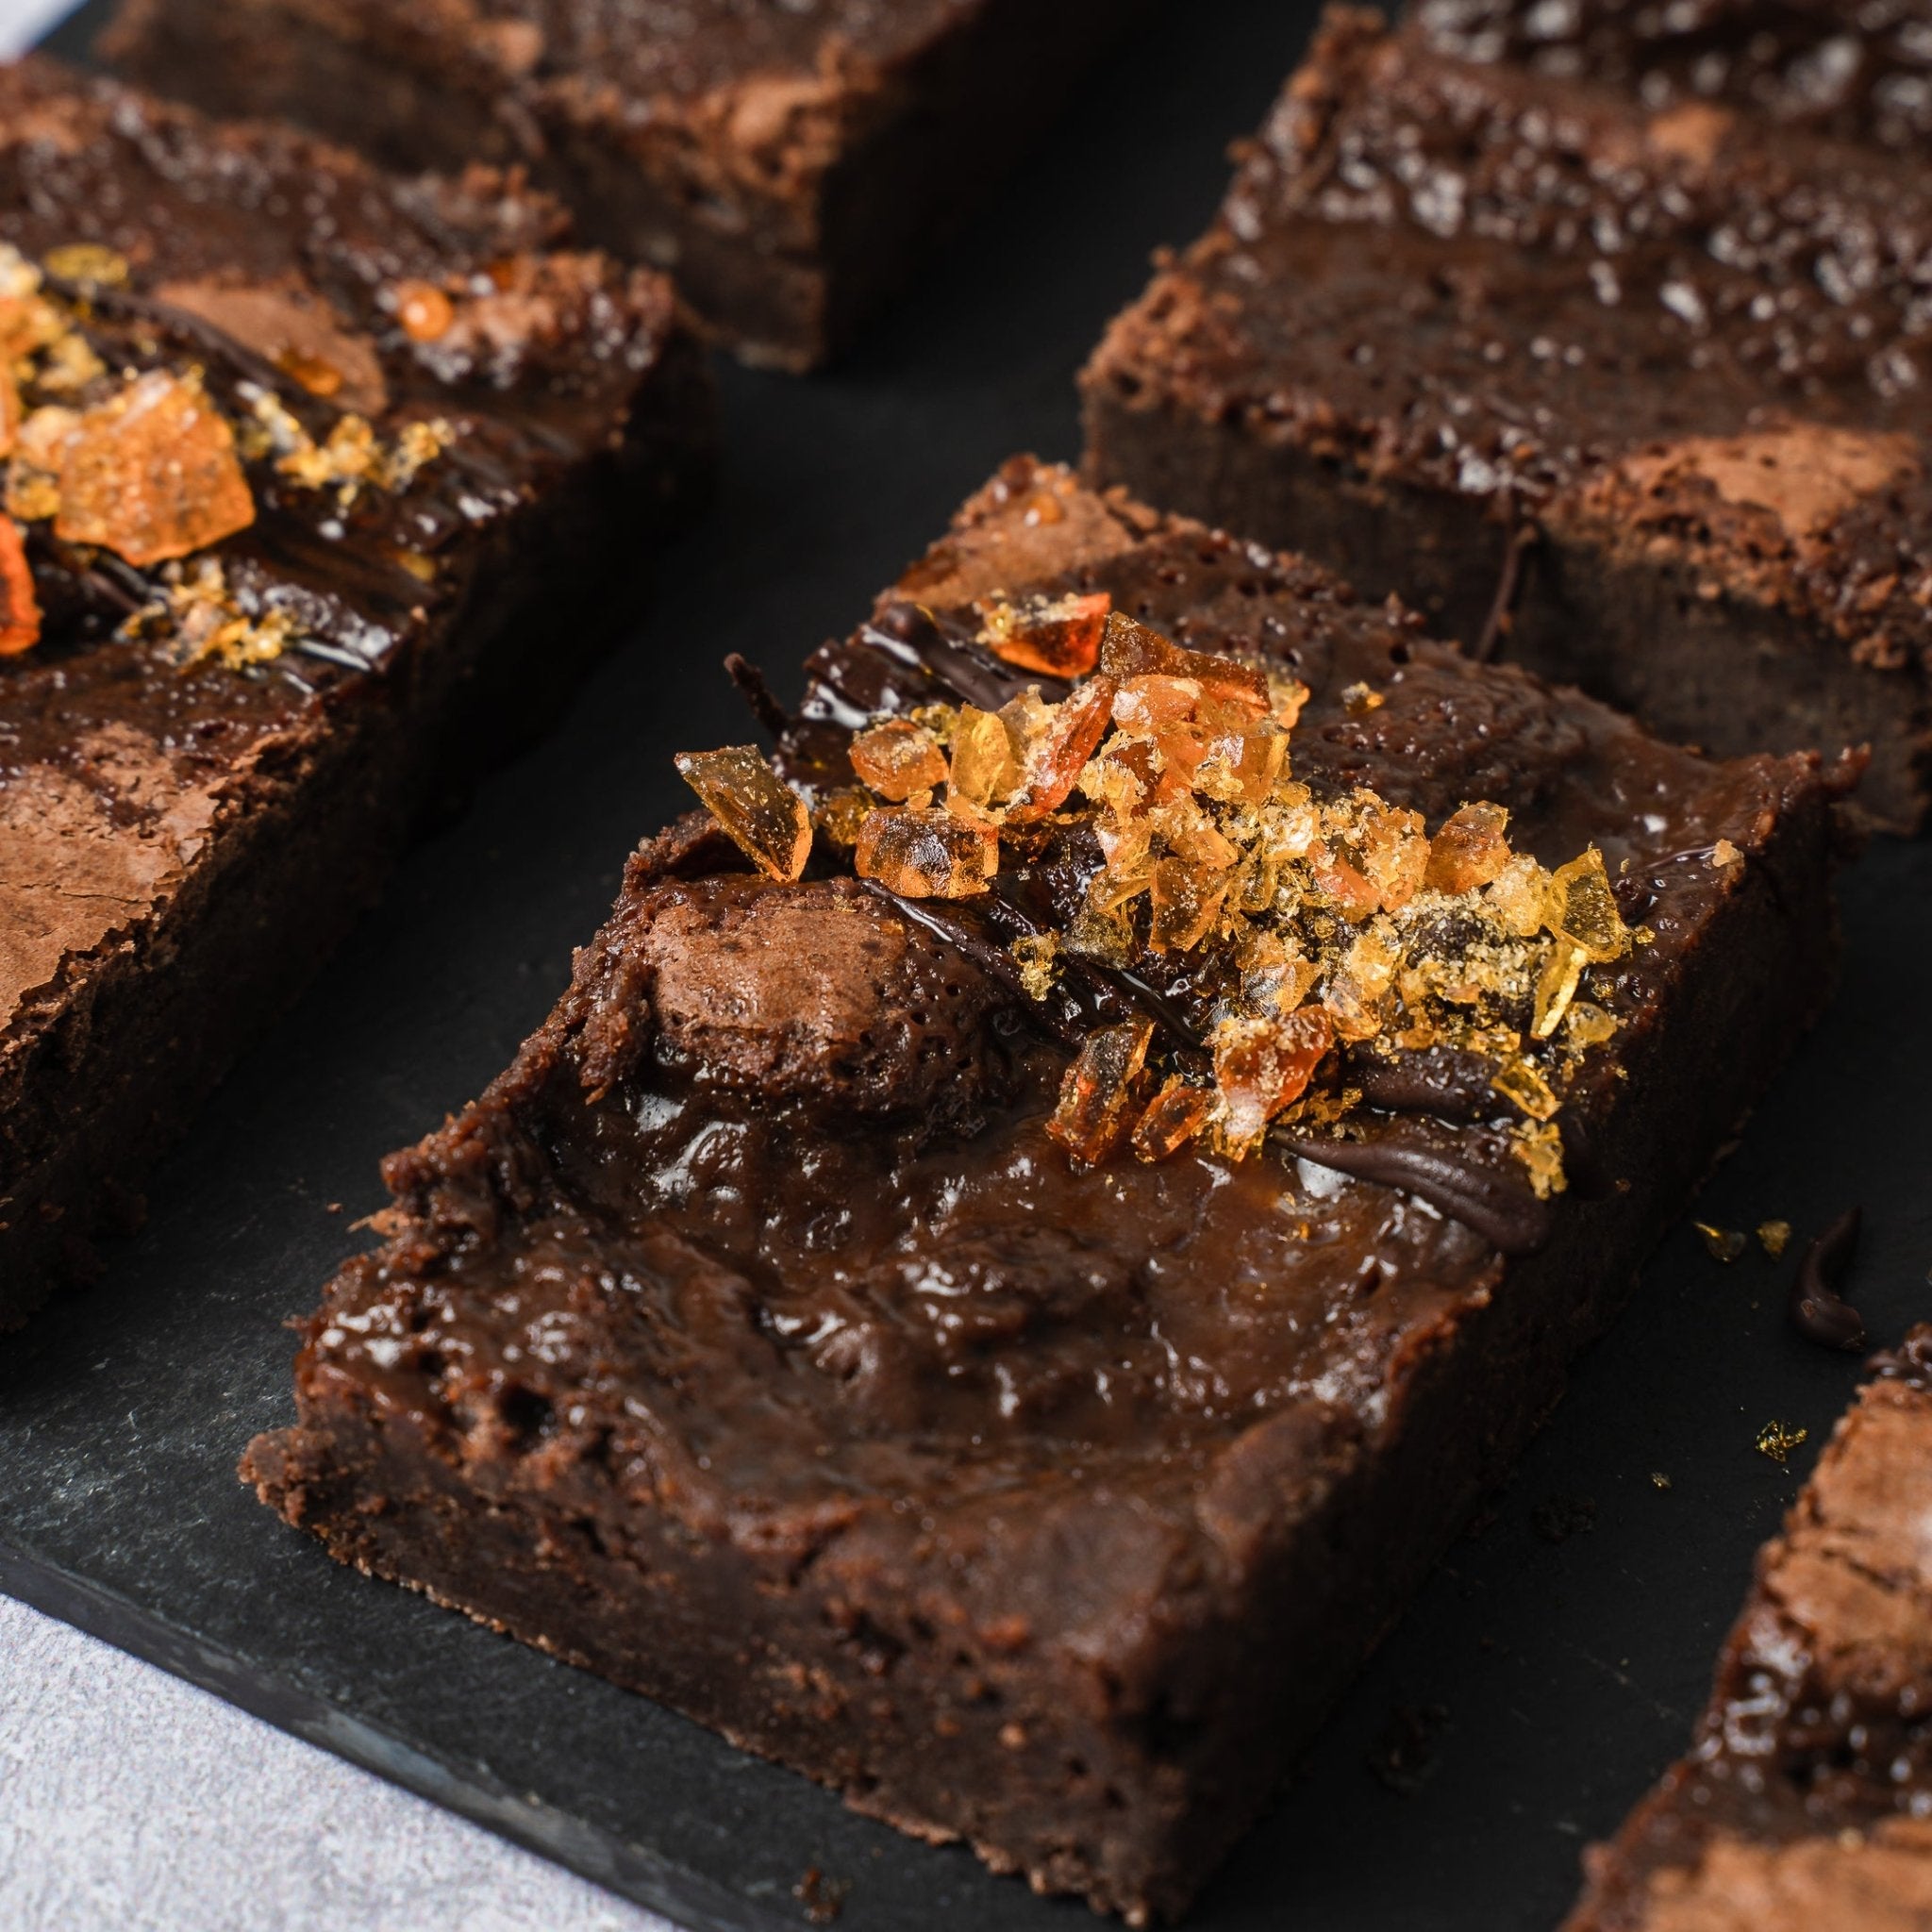 Free from Gluten Salted Caramel Brownie Box of 8 - Jack and Beyond